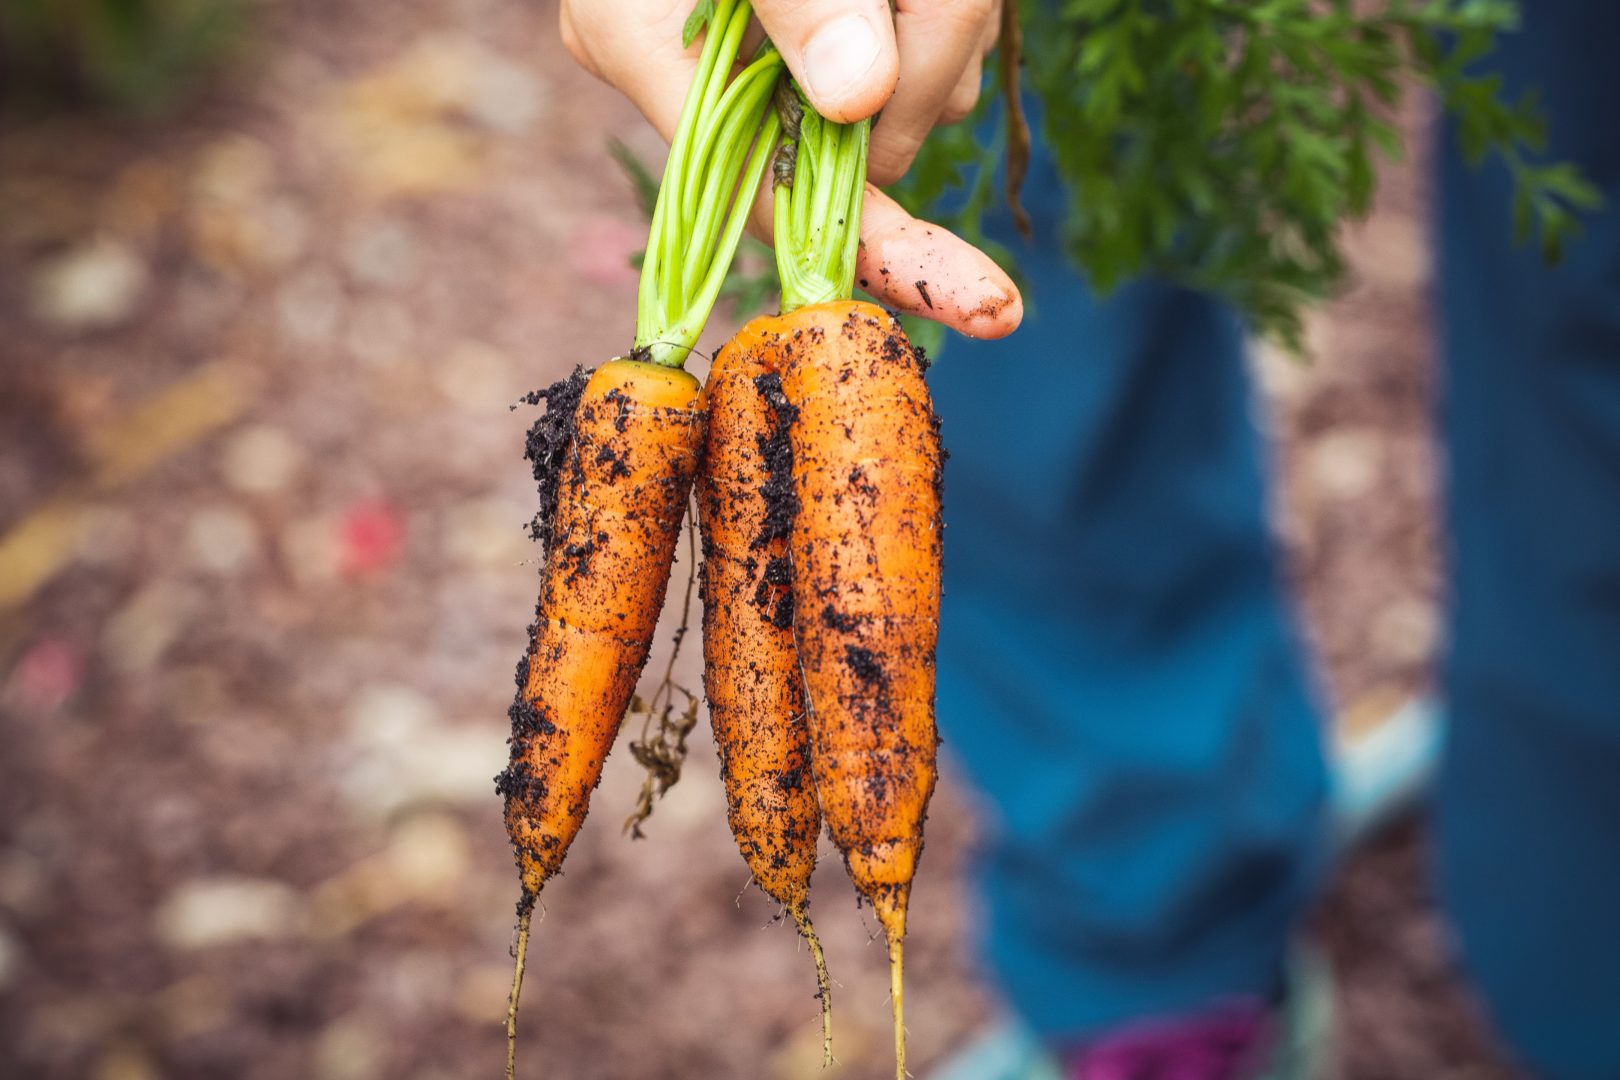 Carrots pulled out of ground